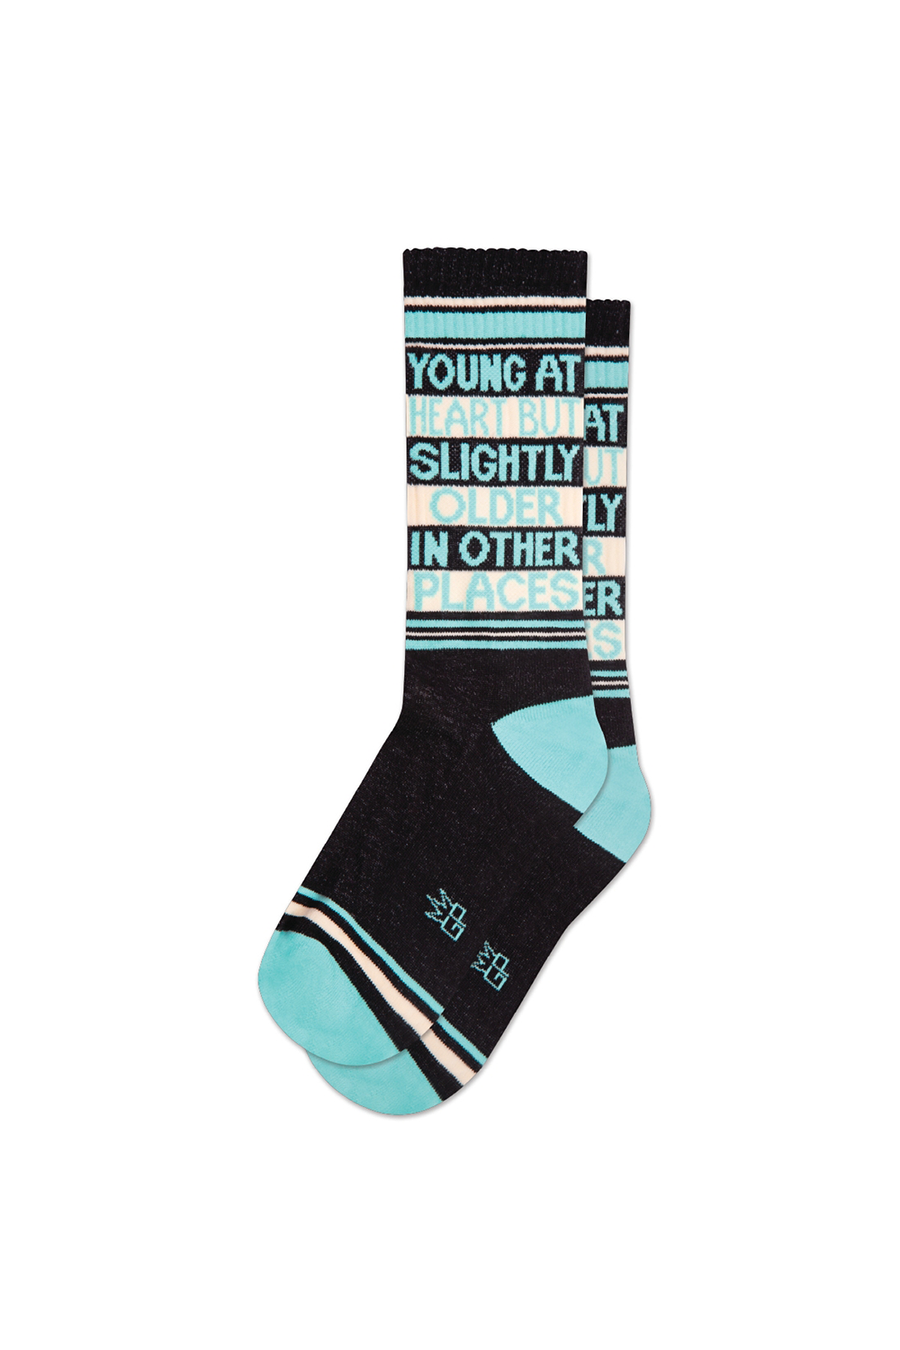 Young At Heart Gym Sock - Main Image Number 1 of 1